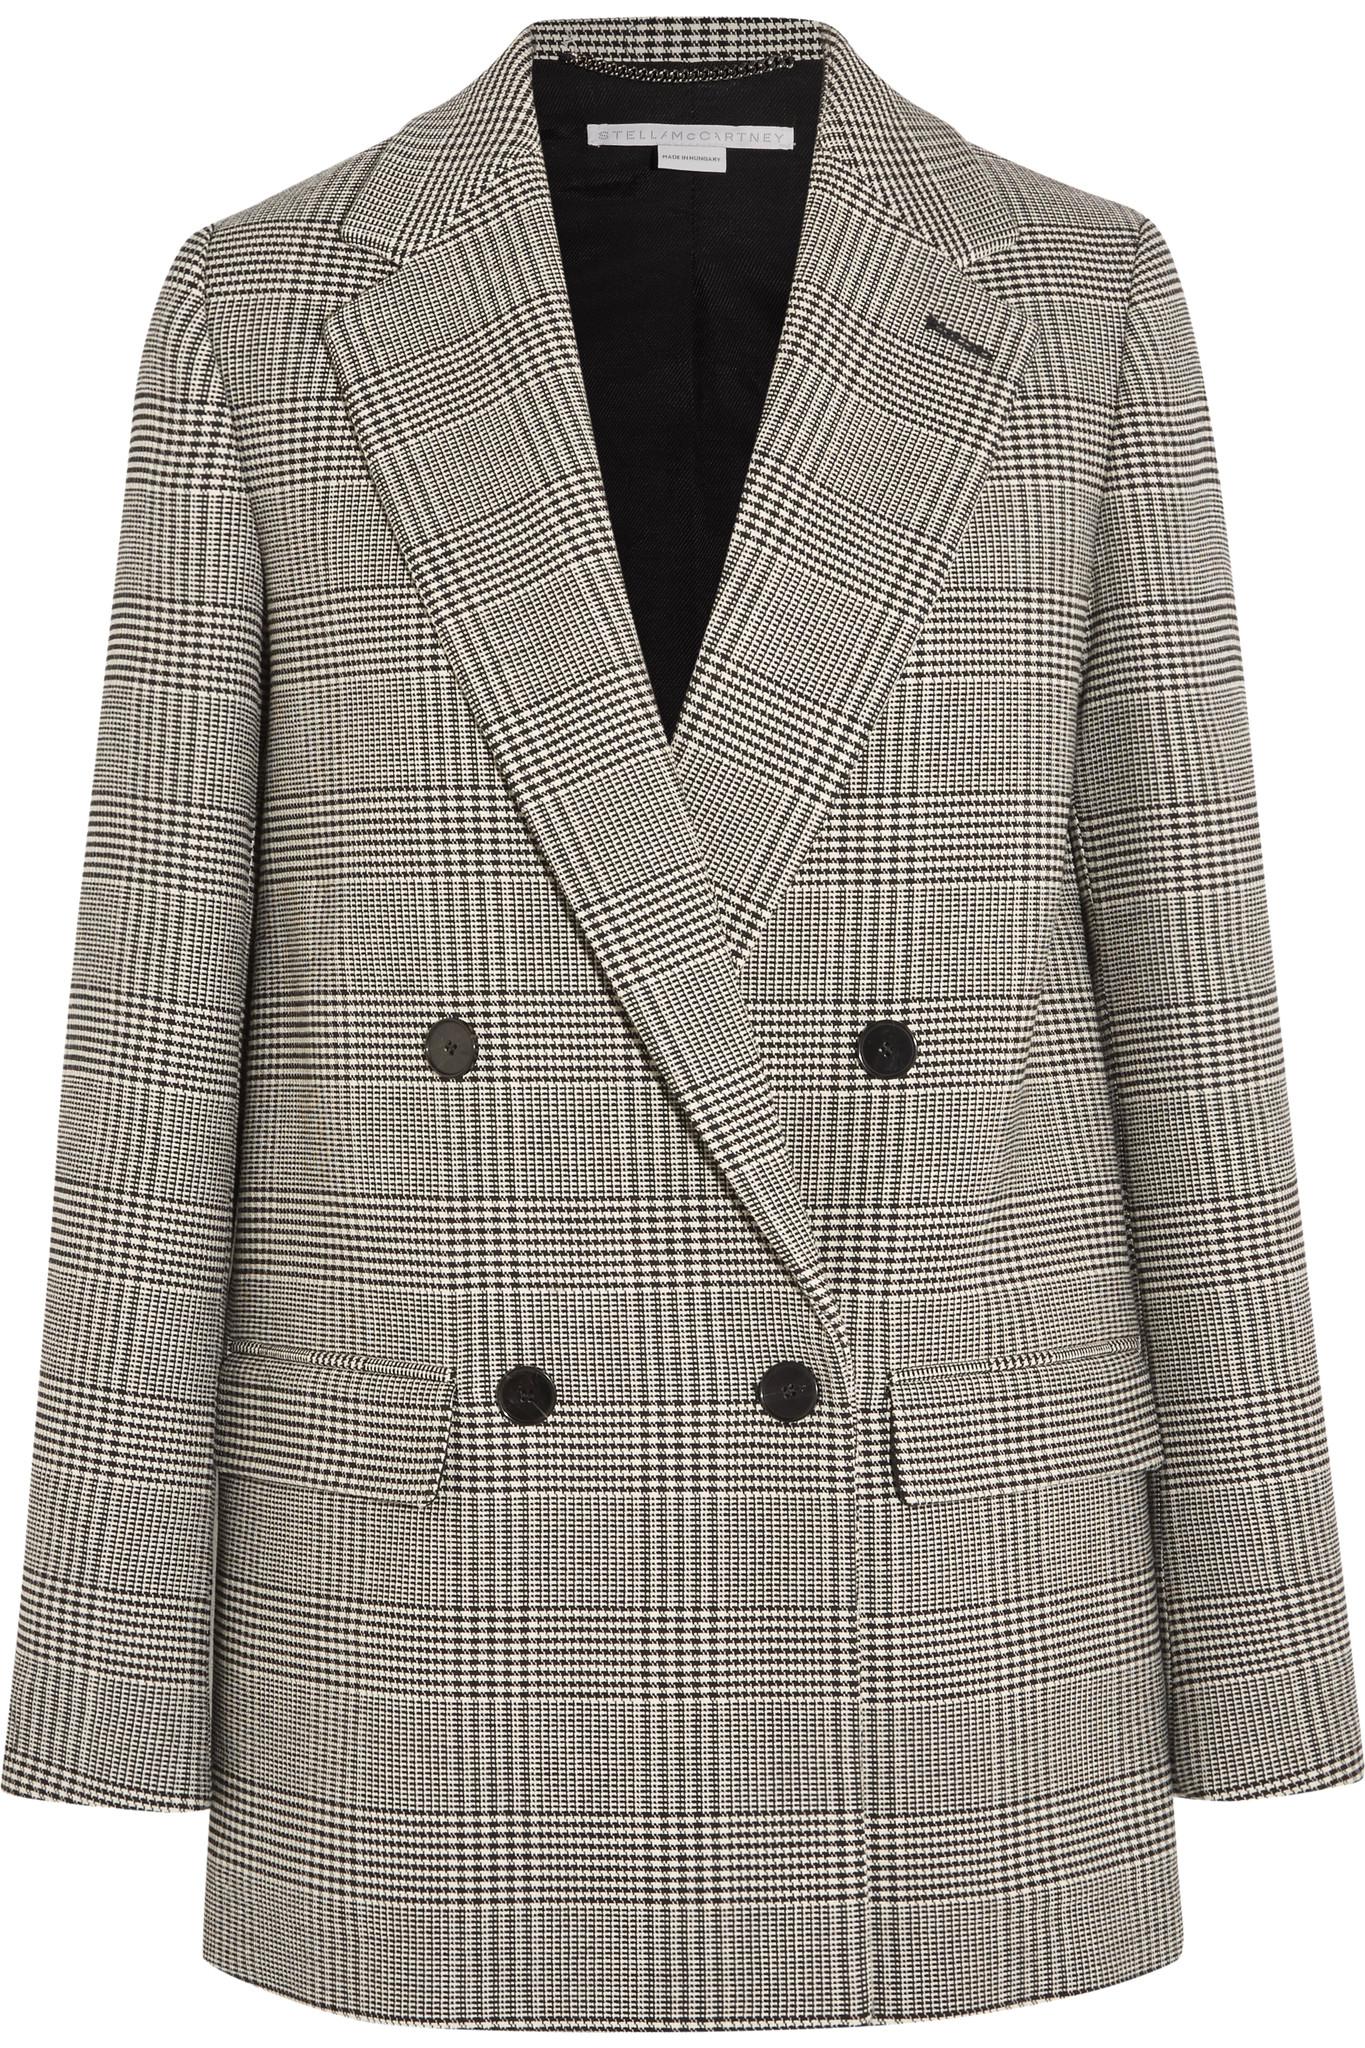 Stella McCartney Milly Prince Of Wales Checked Wool-blend Blazer in ...